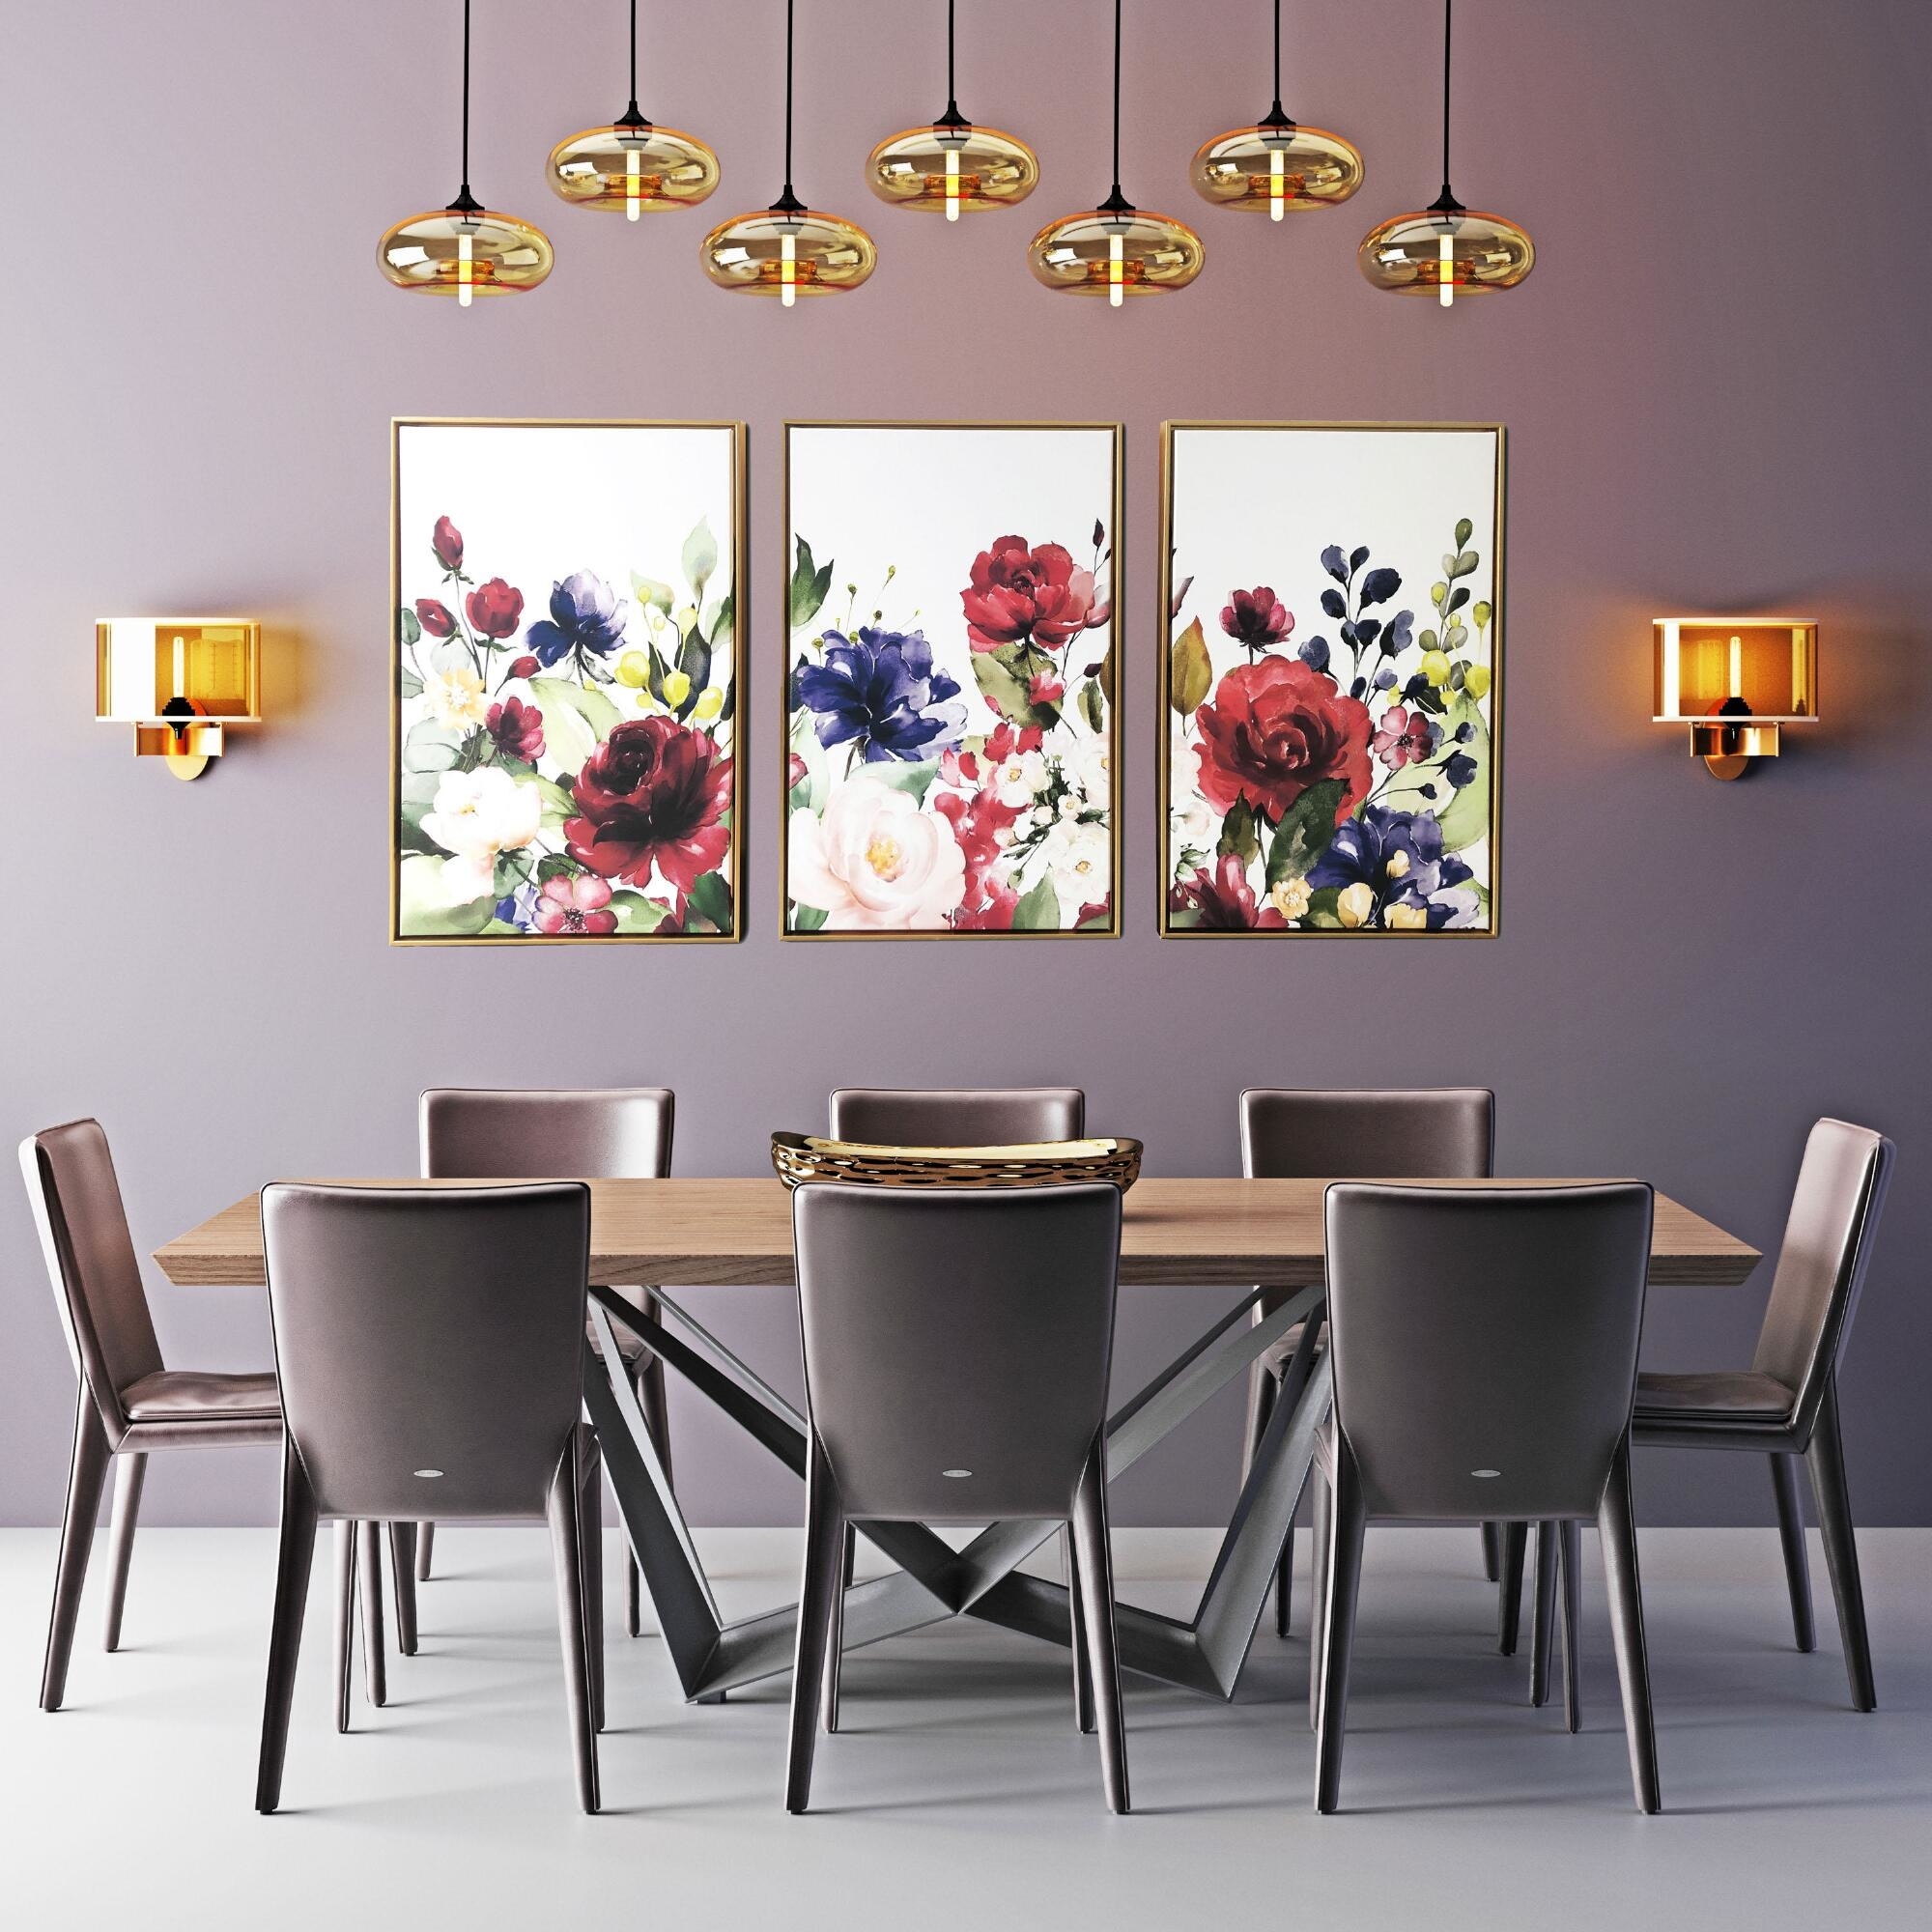 The floral three-piece set hanging on wall by dining room table